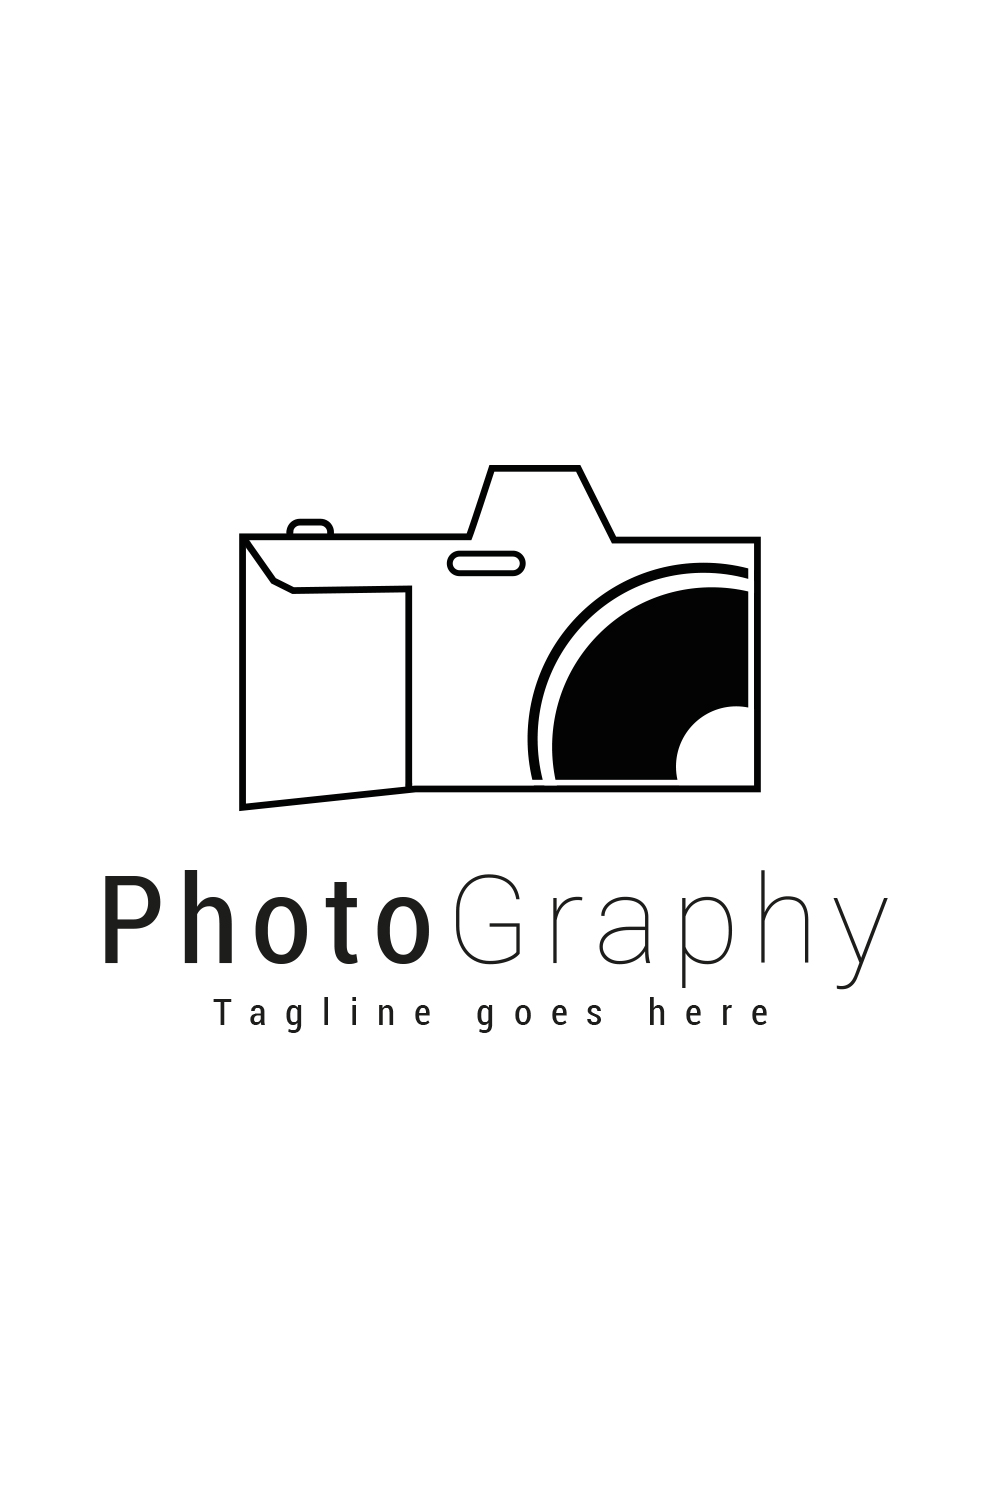 Photography lineart logo pinterest preview image.